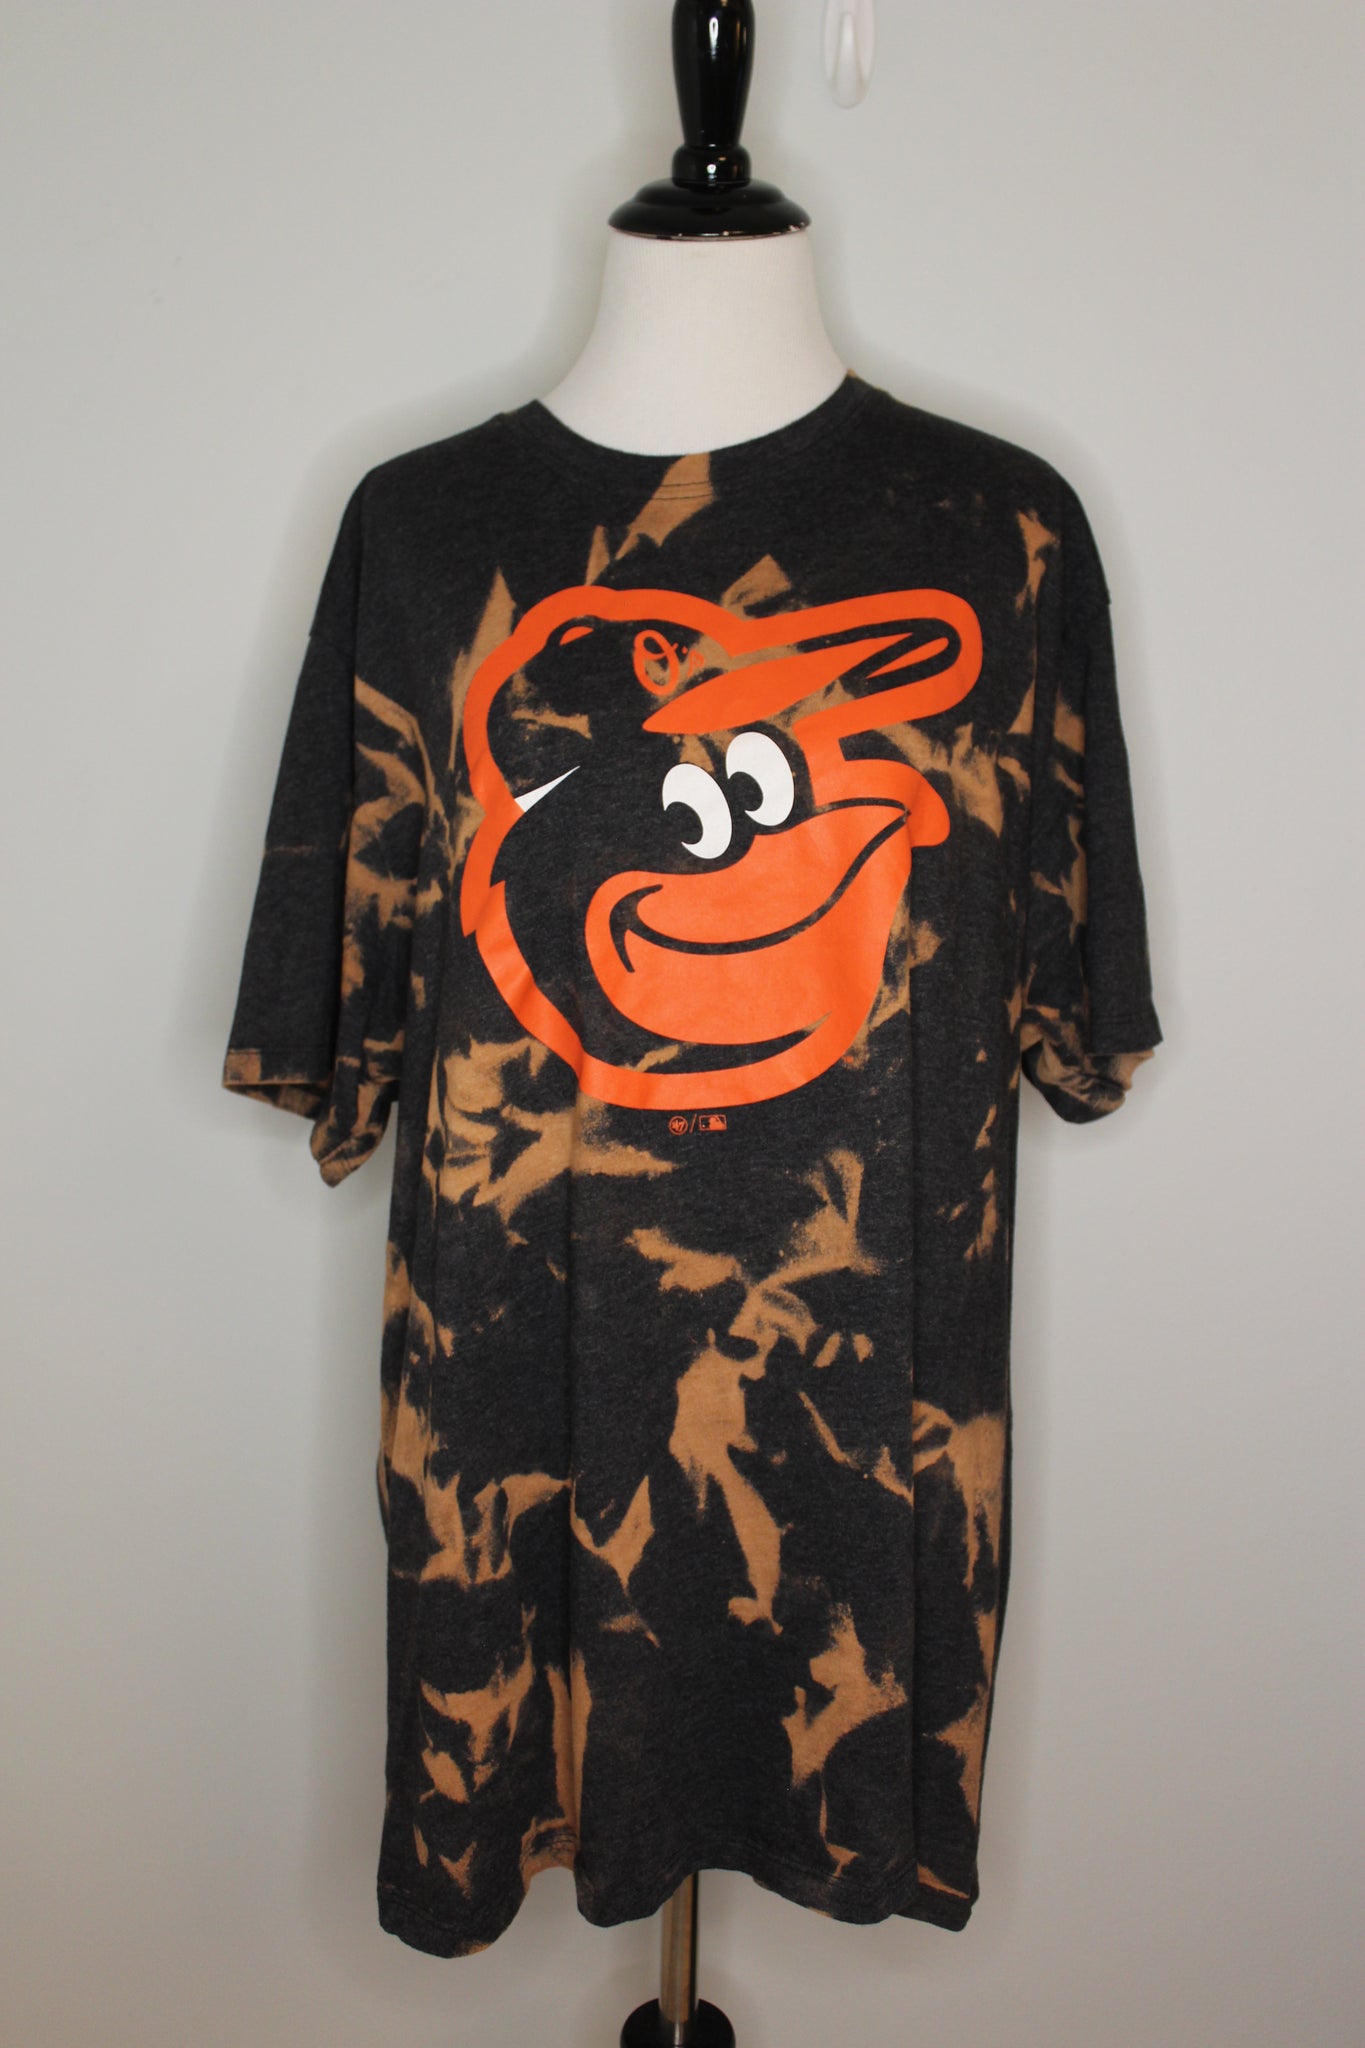 Baltimore Orioles Bleached Shirt